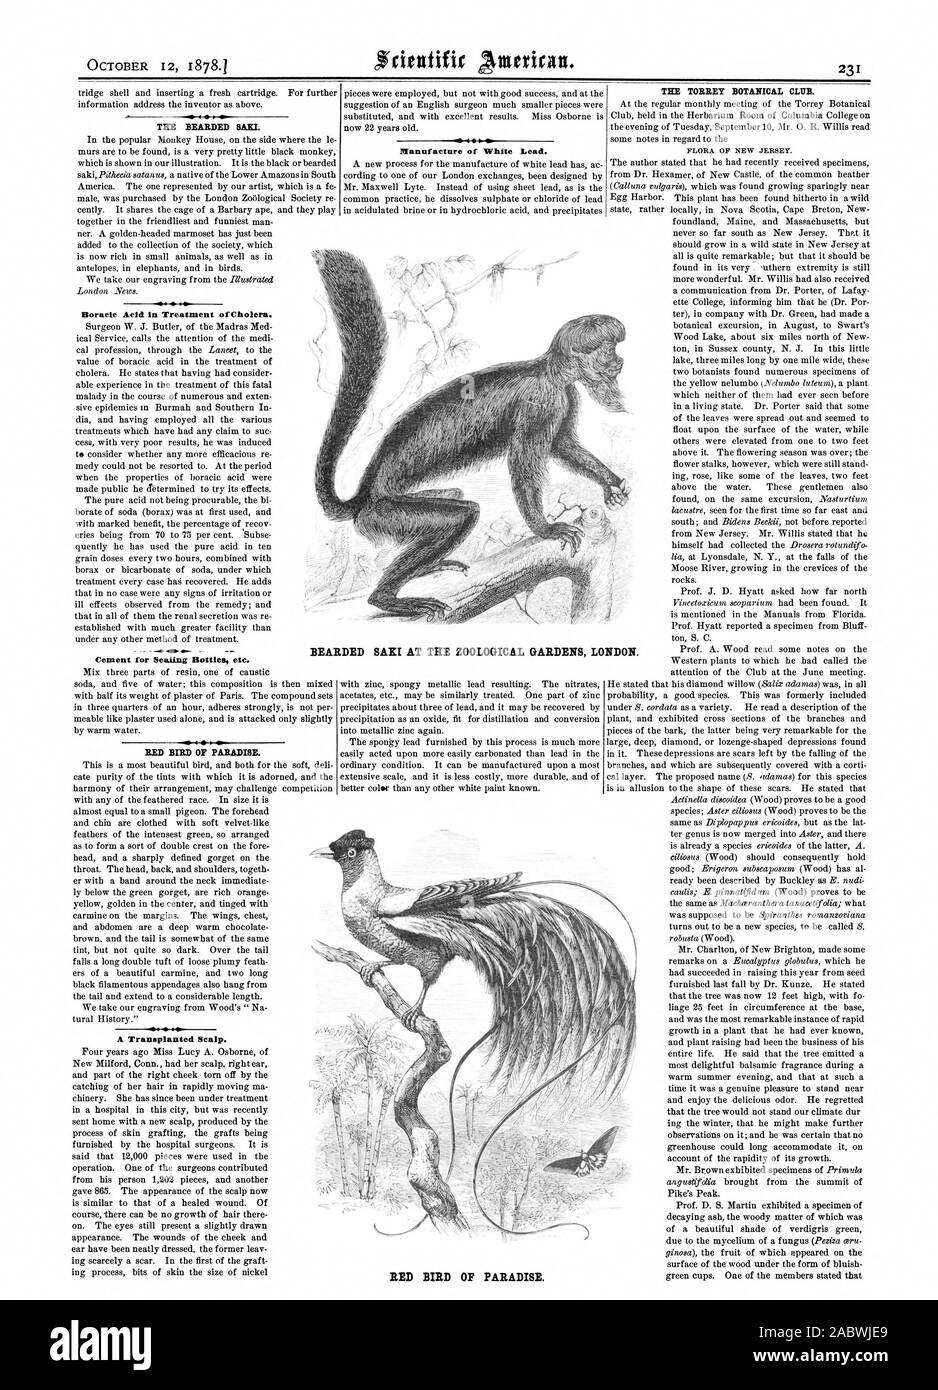 THE BEARDED SAKI Boracic Acid in Treatment ofCholera. Cement for Sealing Bottles etc. RED BIRD OF PARADISE. A Transplanted Scalp. Manufacture of White Lead. THE TORREY BOTANICAL CLUB. BEARDED SAKI AT THE ZOOLOGICAL GARDENS L NDON. RED BIRD OF PARADISE., scientific american, 1878-10-12 Stock Photo